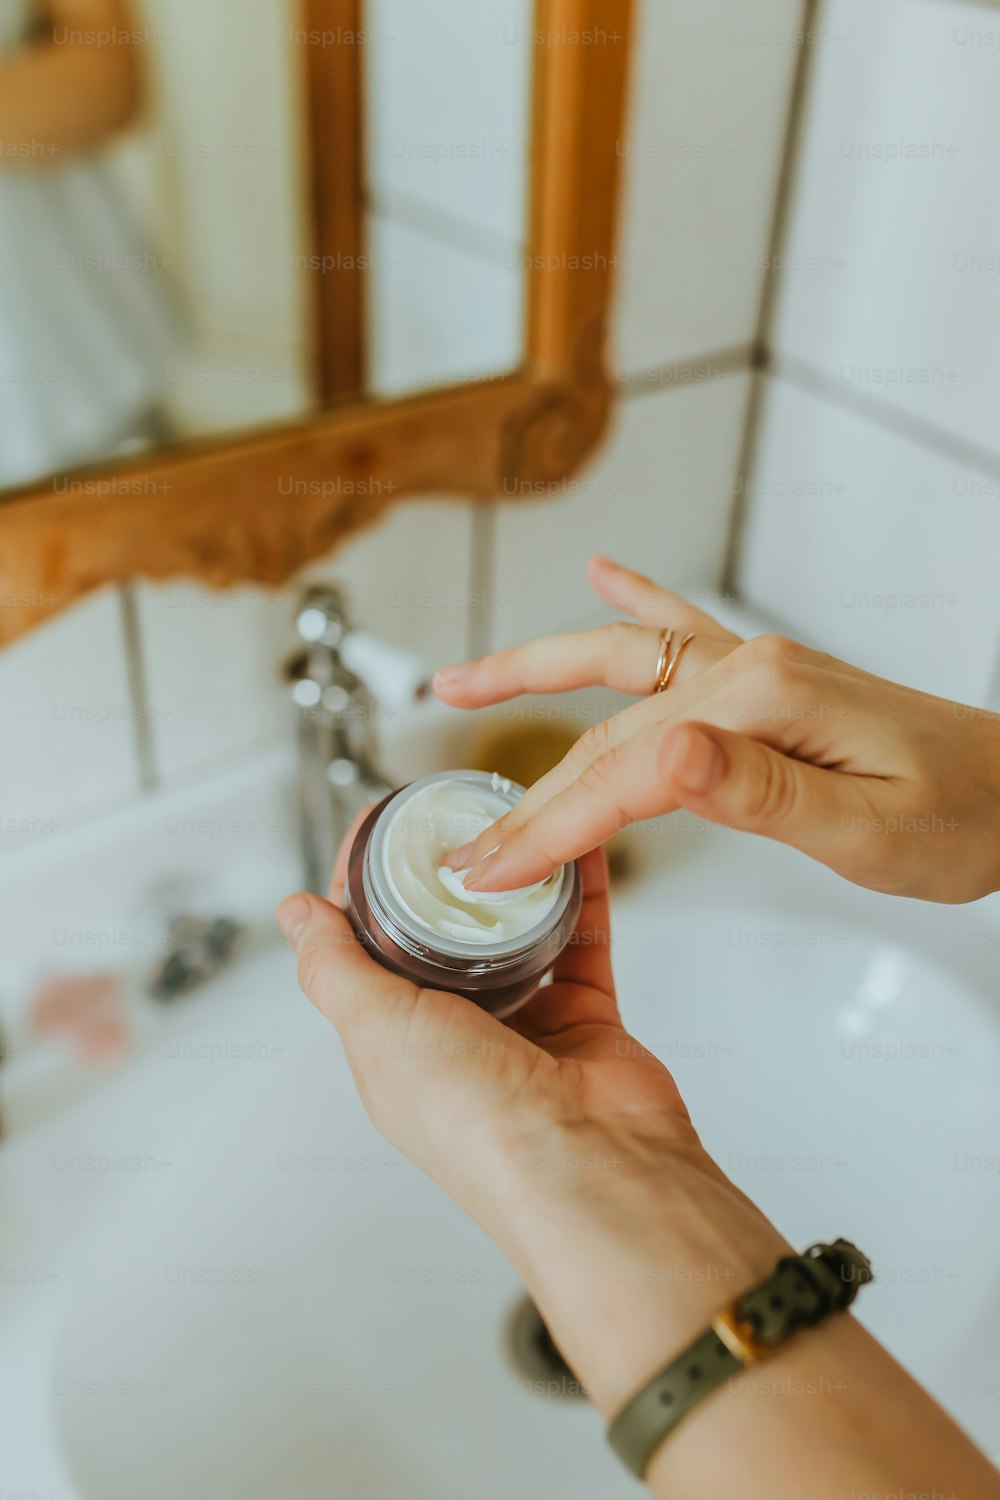 a person holding a jar of cream in front of a bathroom sink